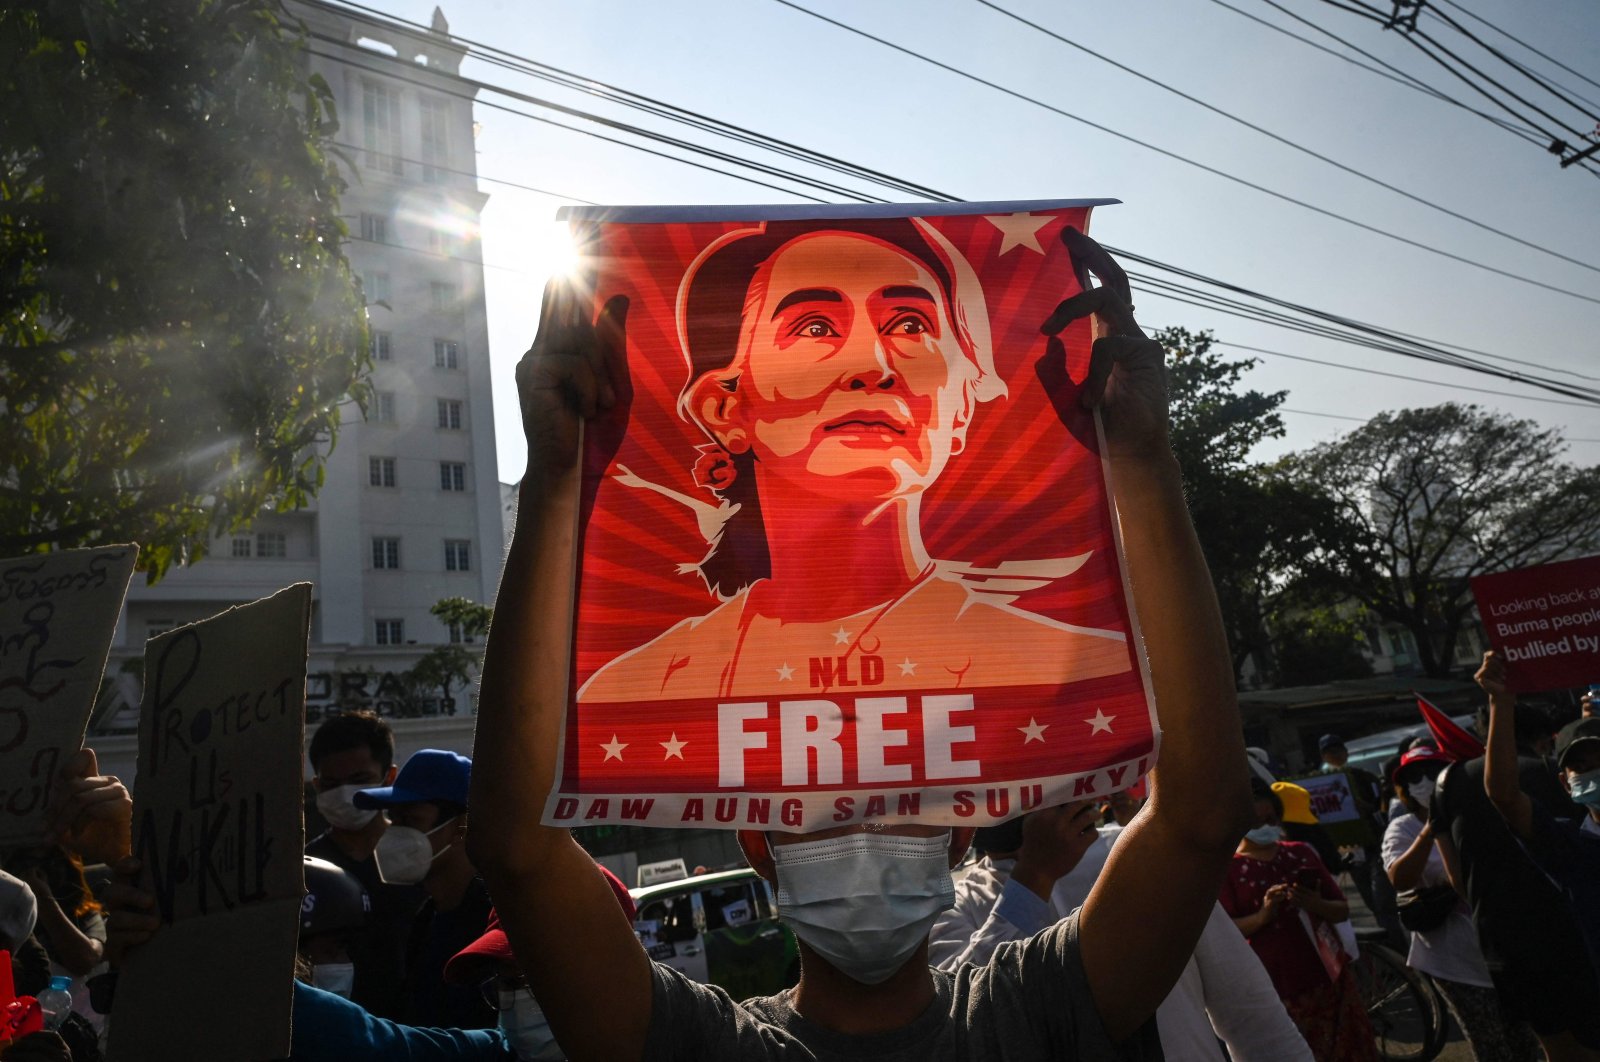 A protester holds up a poster featuring Aung San Suu Kyi during a demonstration, Yangon, Myanmar, Feb. 15, 2021. (AFP Photo)